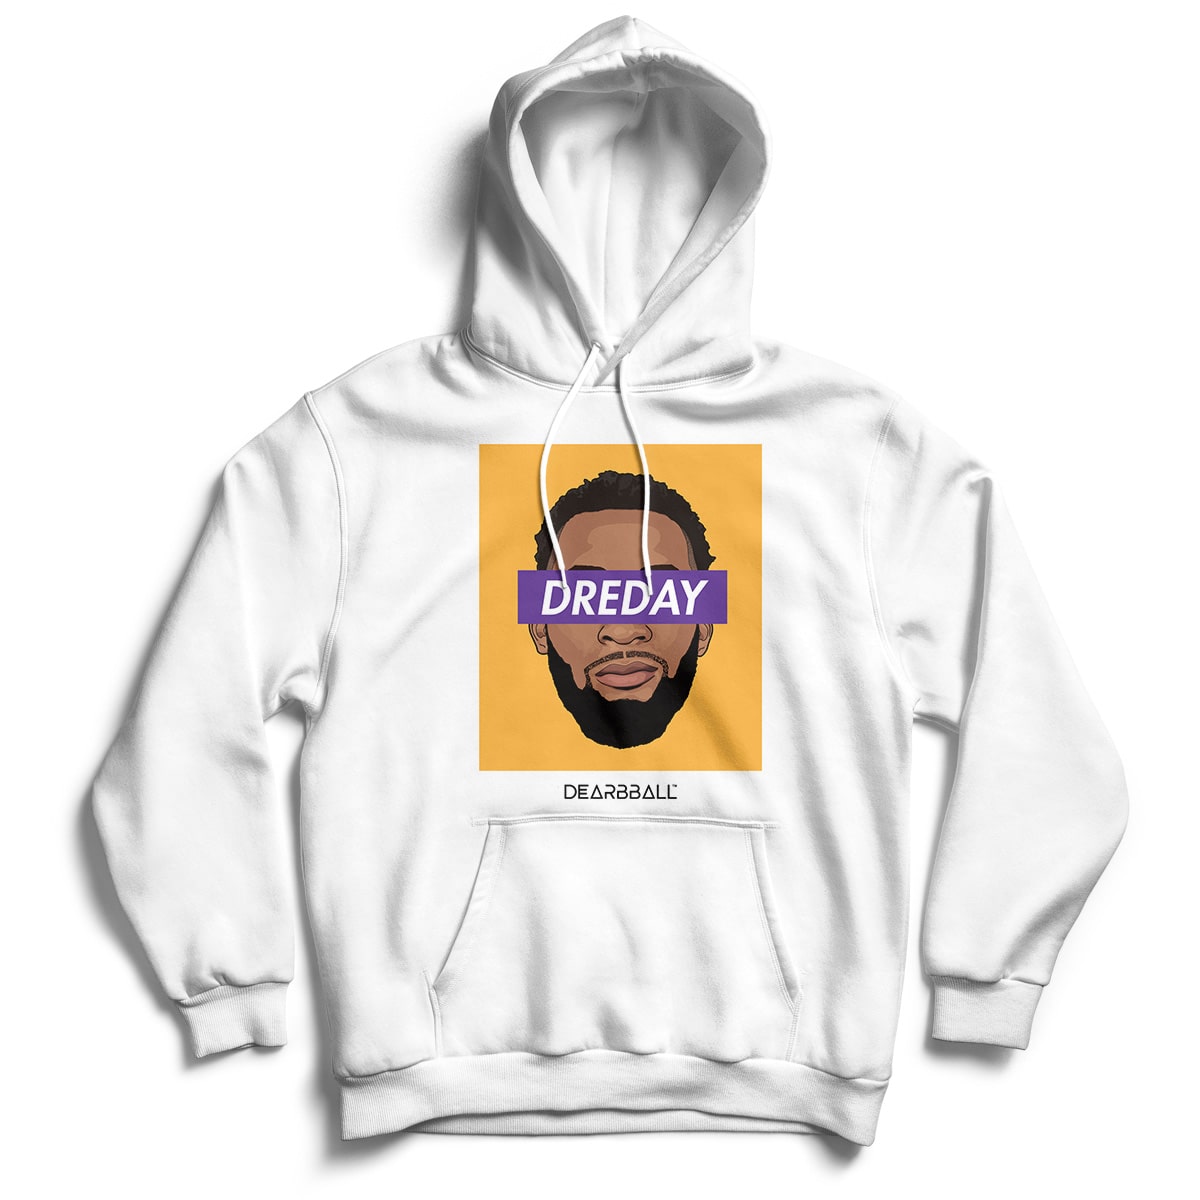 Andre Drummond Sweat à Capuche Bio - DRE DAY Yellow Los Angeles Lakers Basketball Dearbball blanc